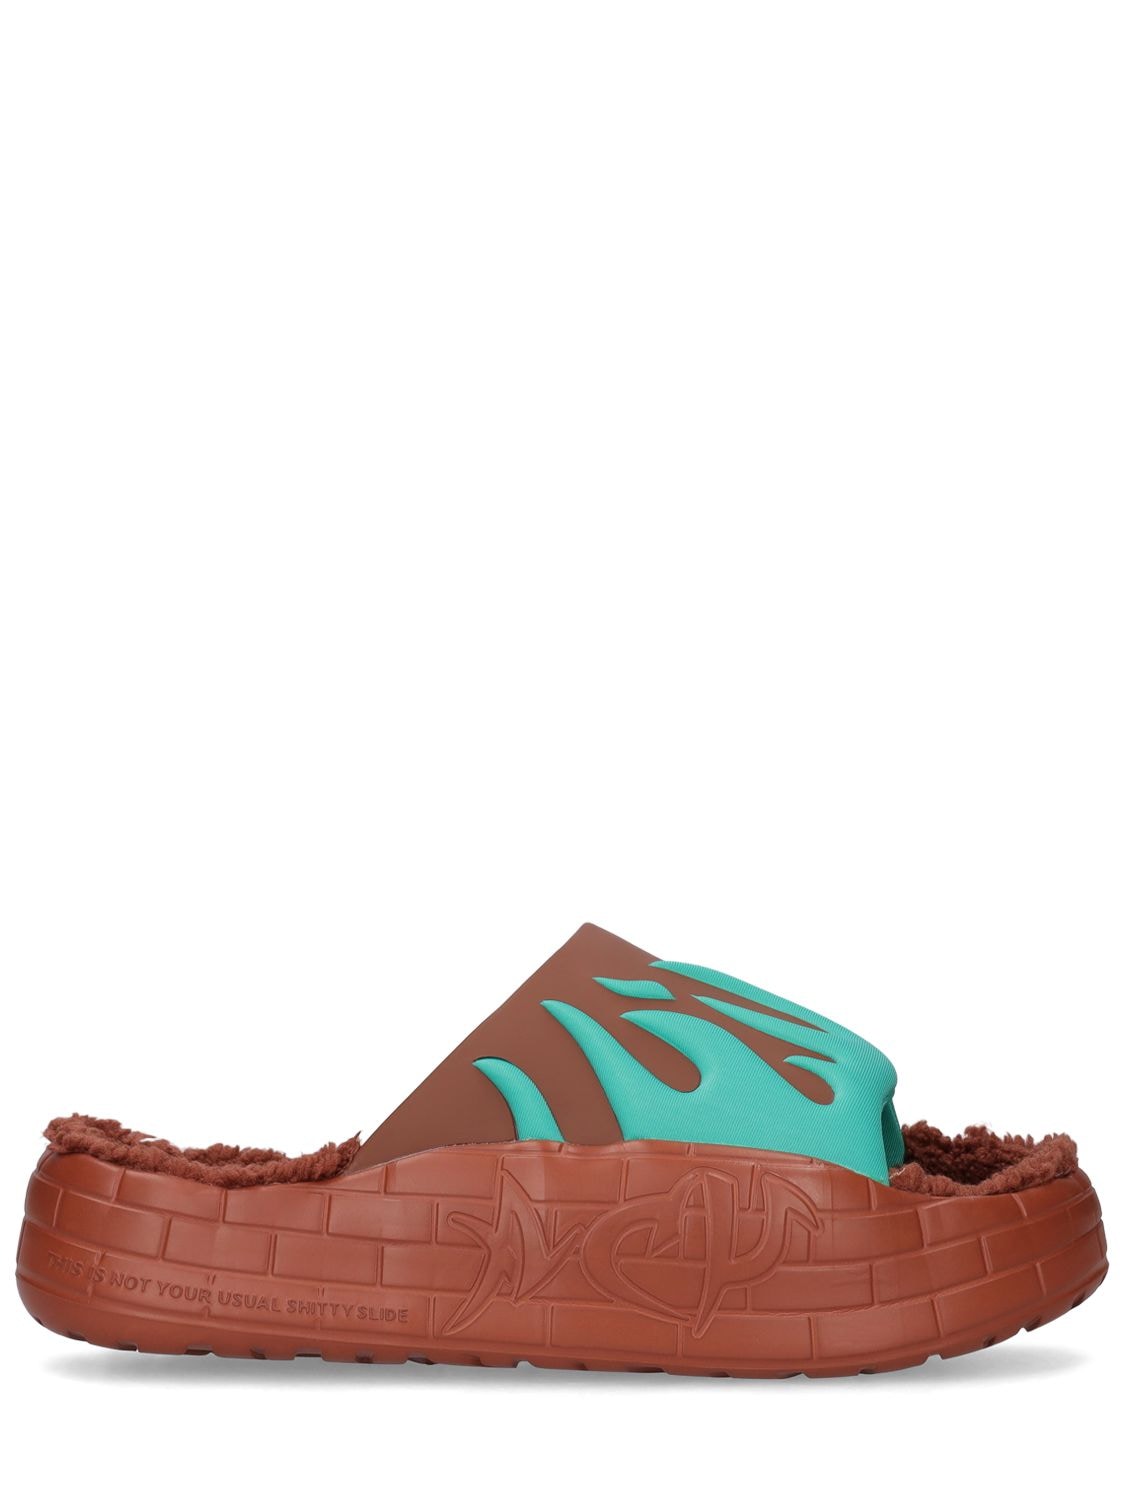 Acupuncture Nyu Flames Rubber Slide Sandals In Brown